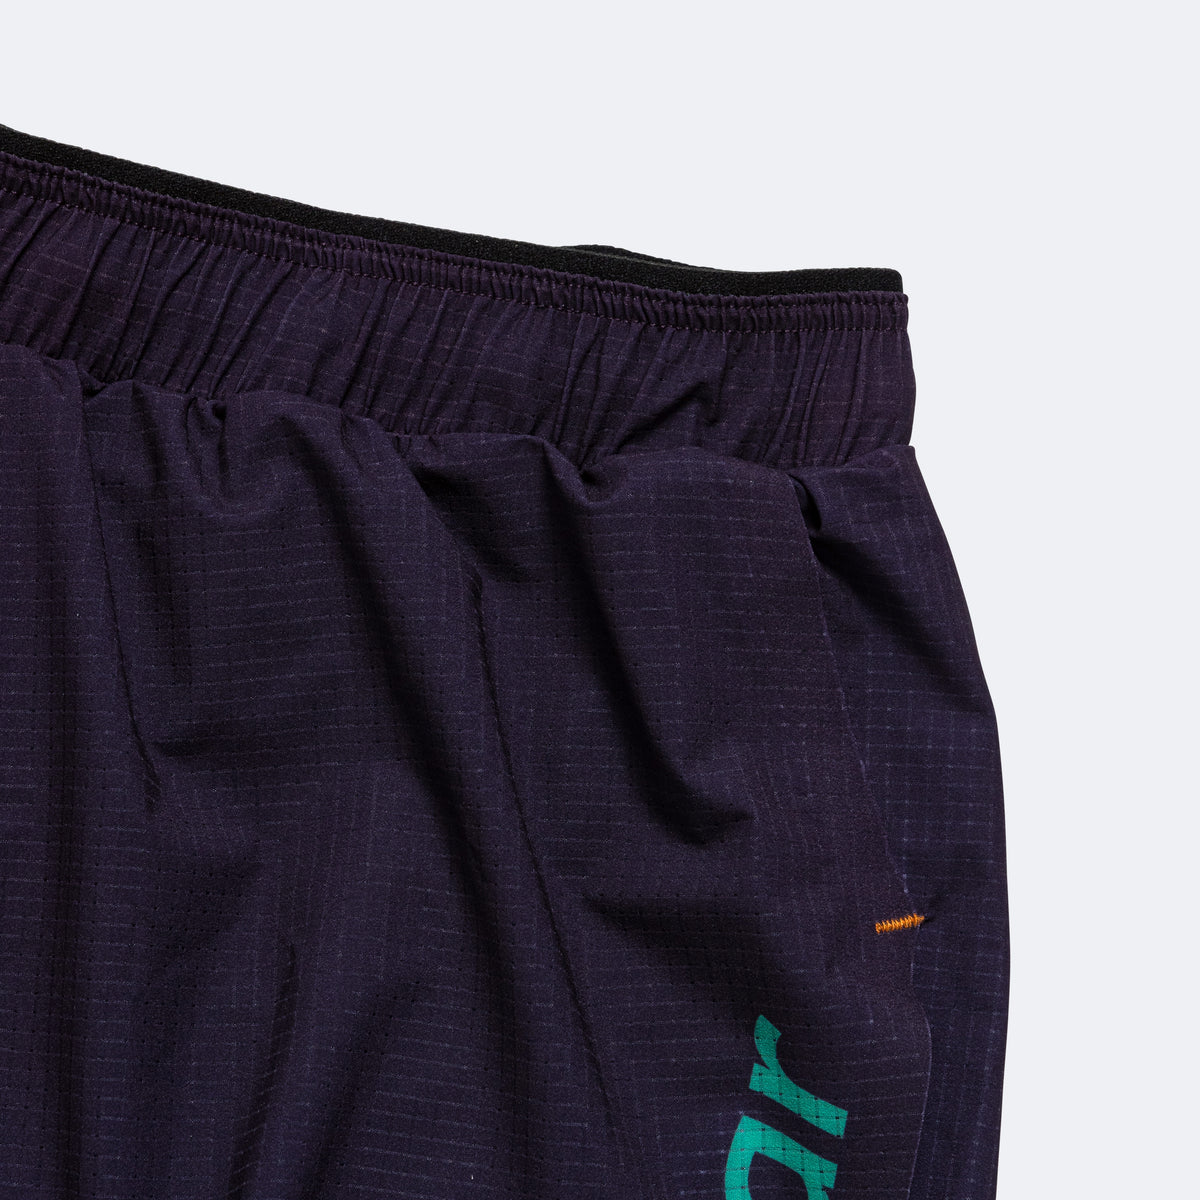 Soar Mens Race Shorts - Purple | Up There Athletics